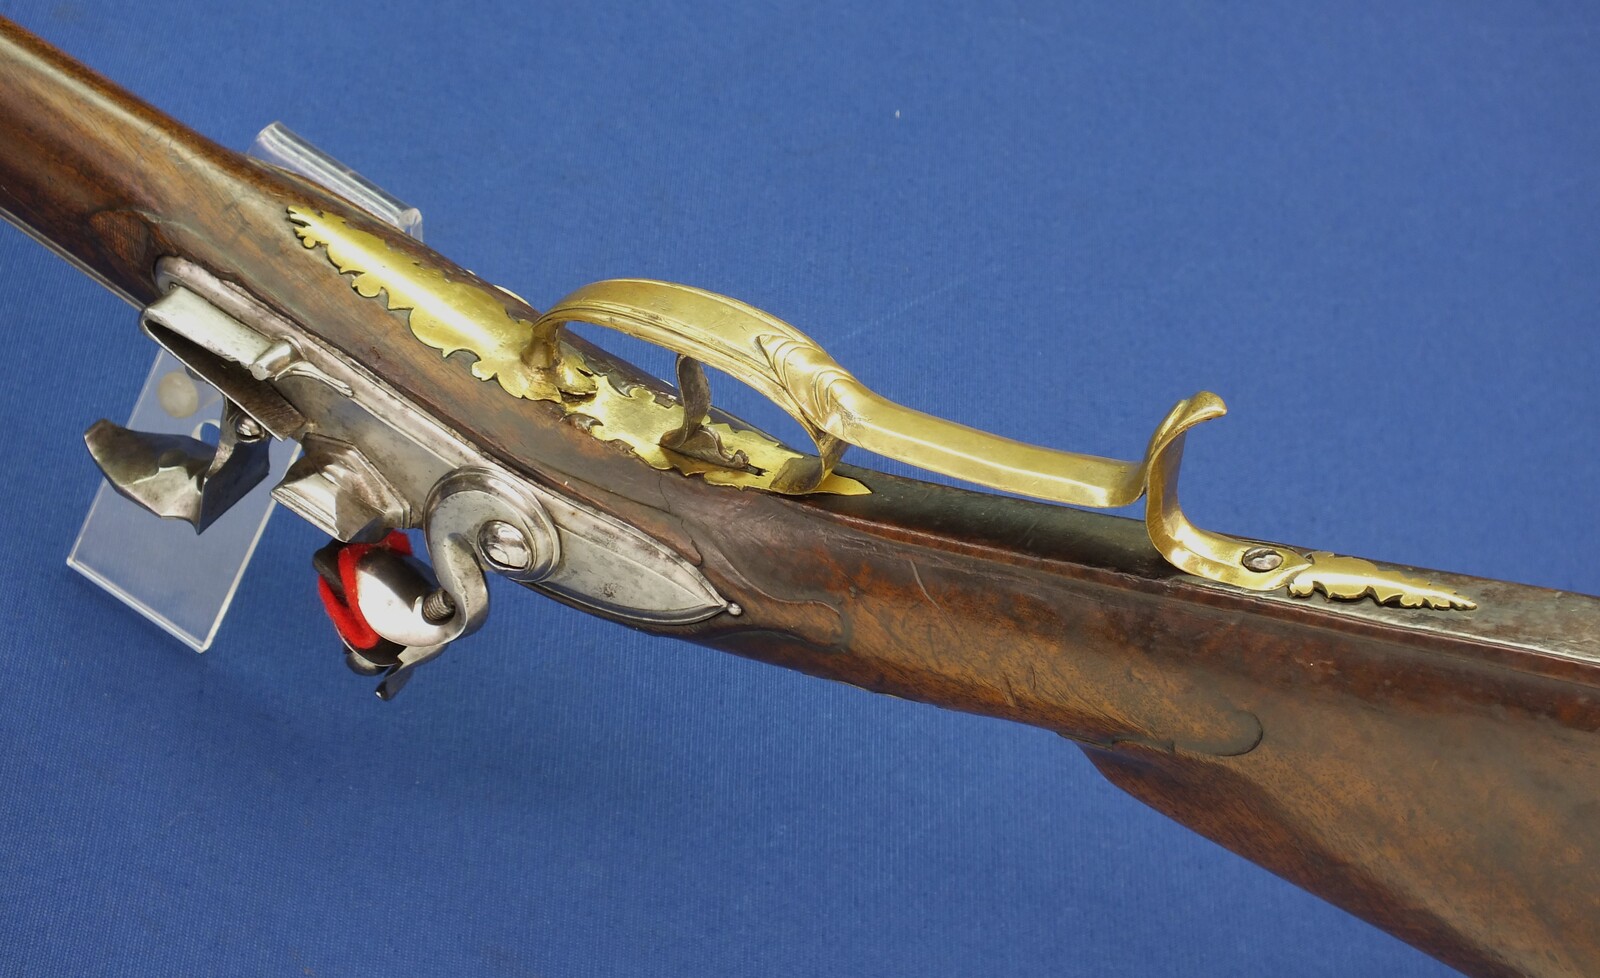 A very nice antique 18th Century German Flintlock Gun, caliber 15 mm smooth, length 145 cm, provenance the German Noble Family Thurn & Taxis - Castle Regensburg, in very good condition. Price 2.800 euro